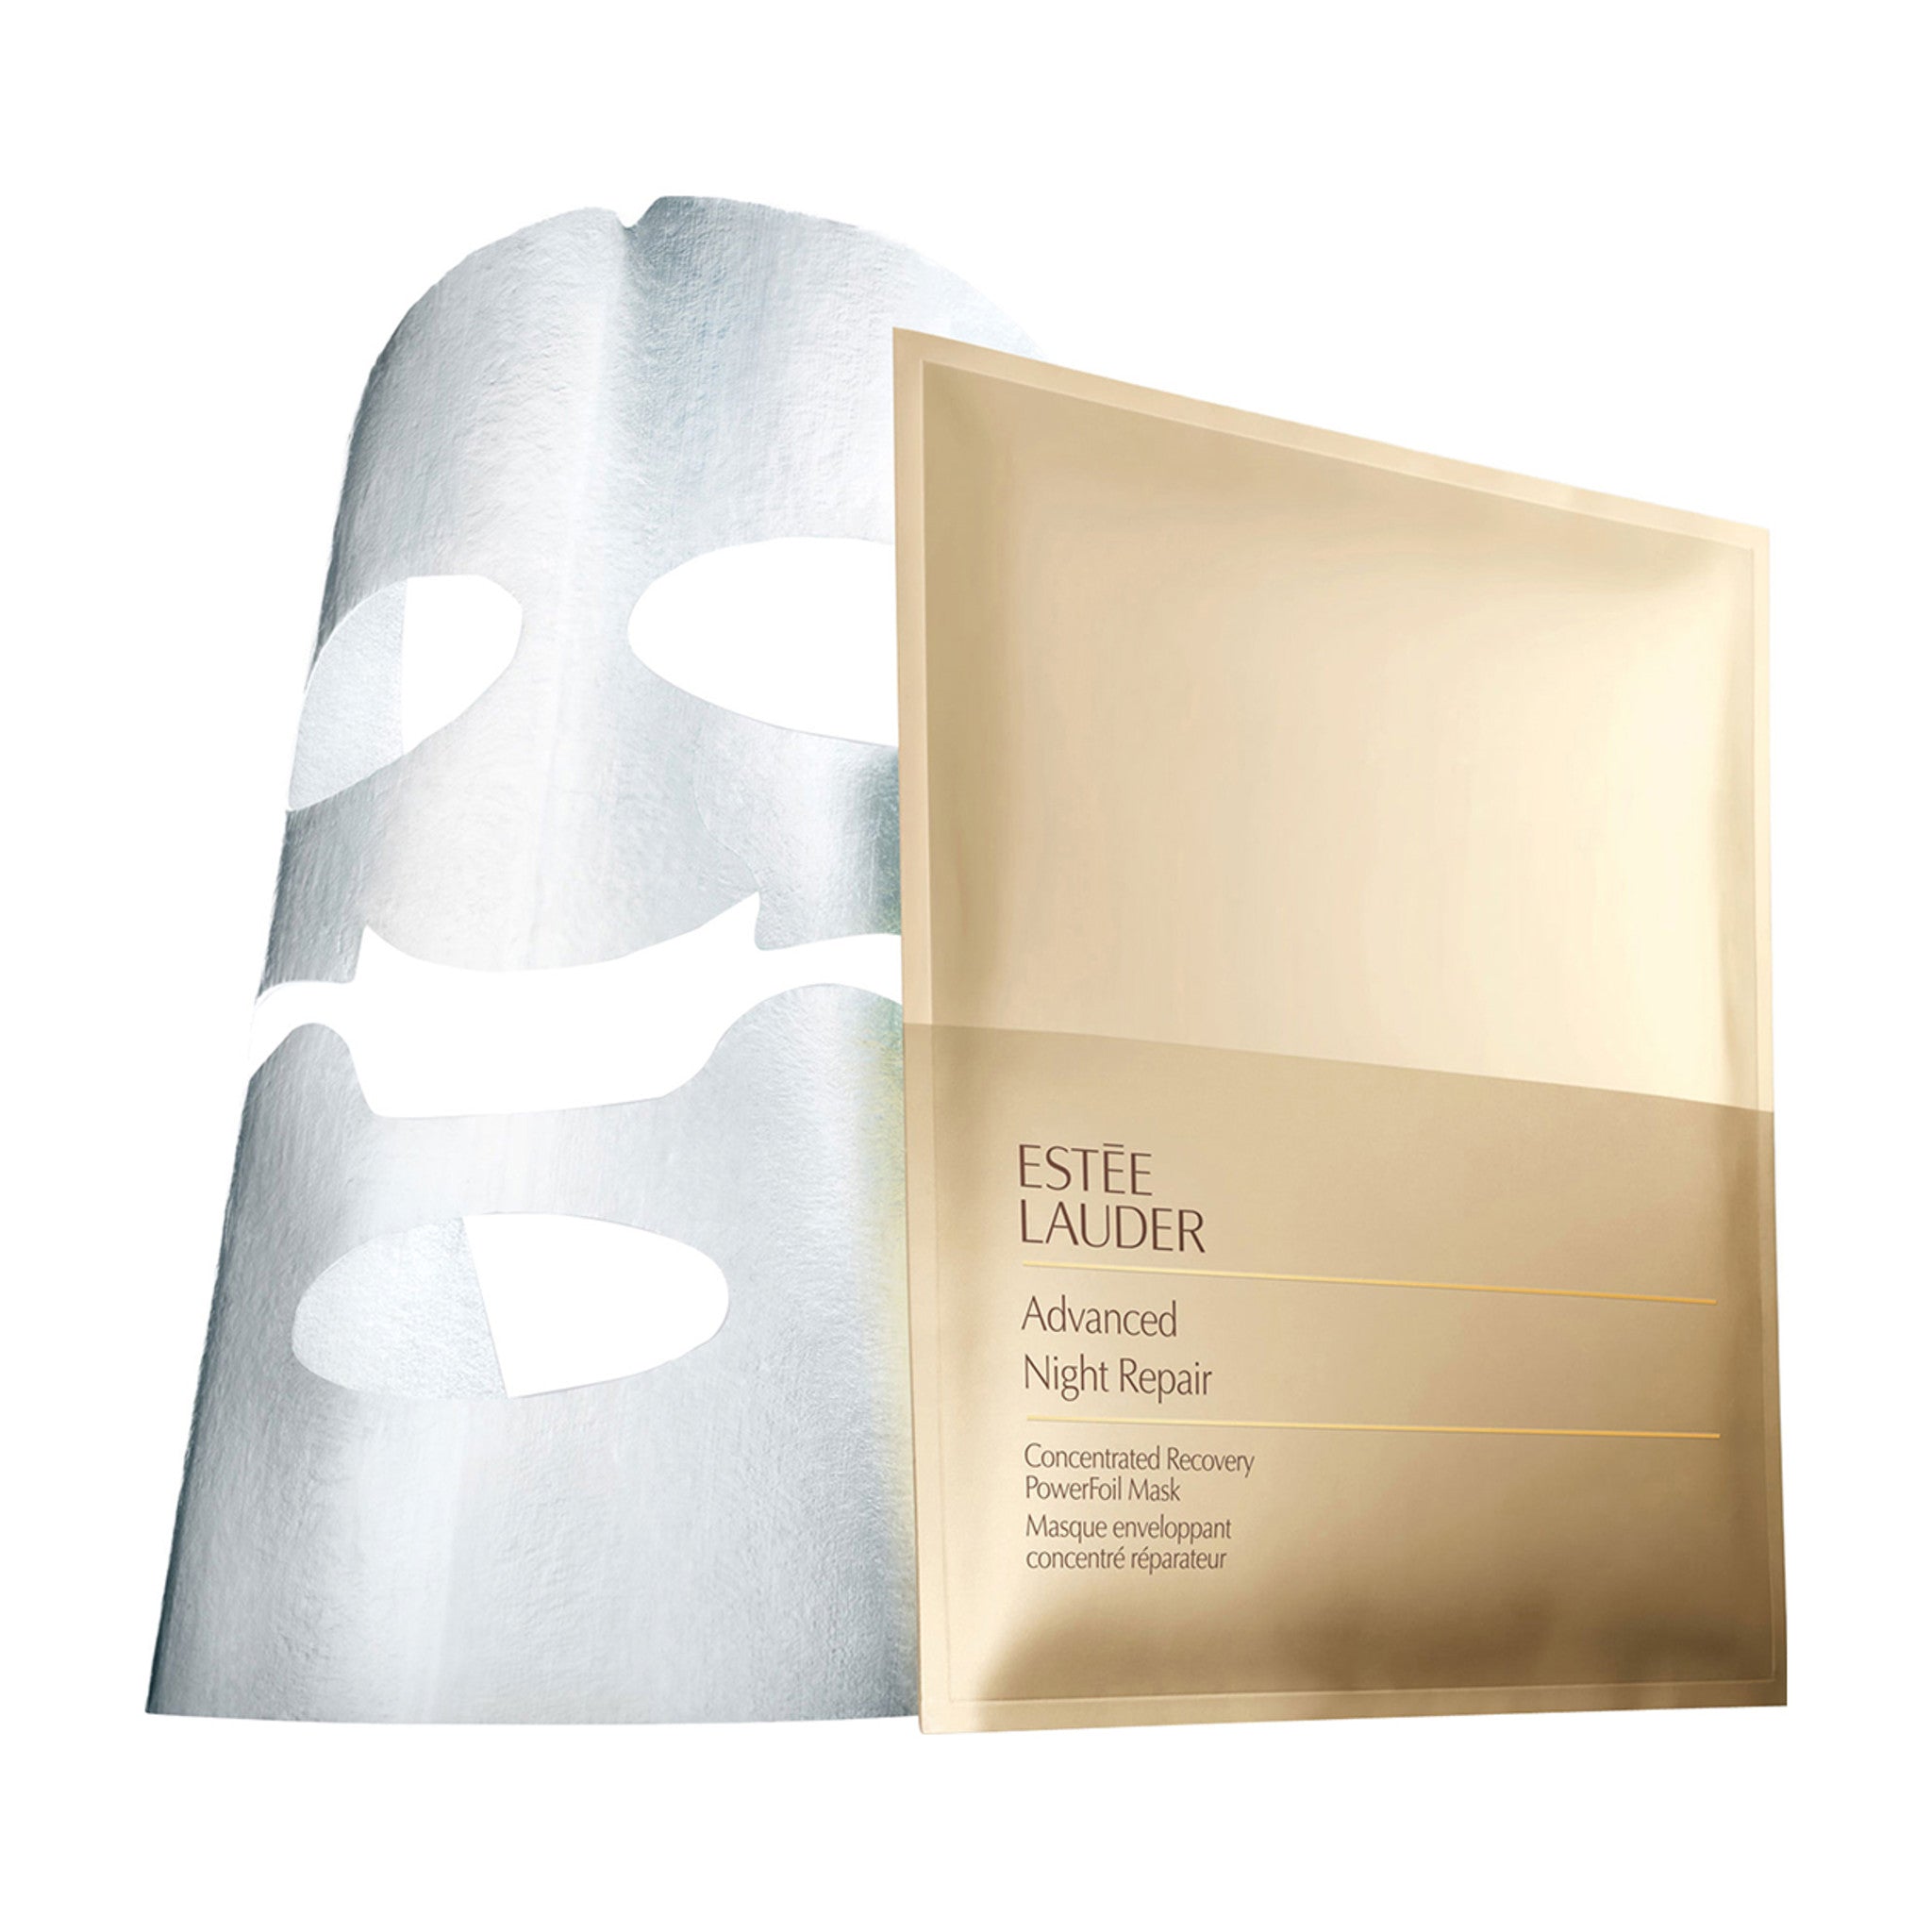 Estée Lauder Advanced Night Repair Concentrated Recovery Powerfoil Mask main image.